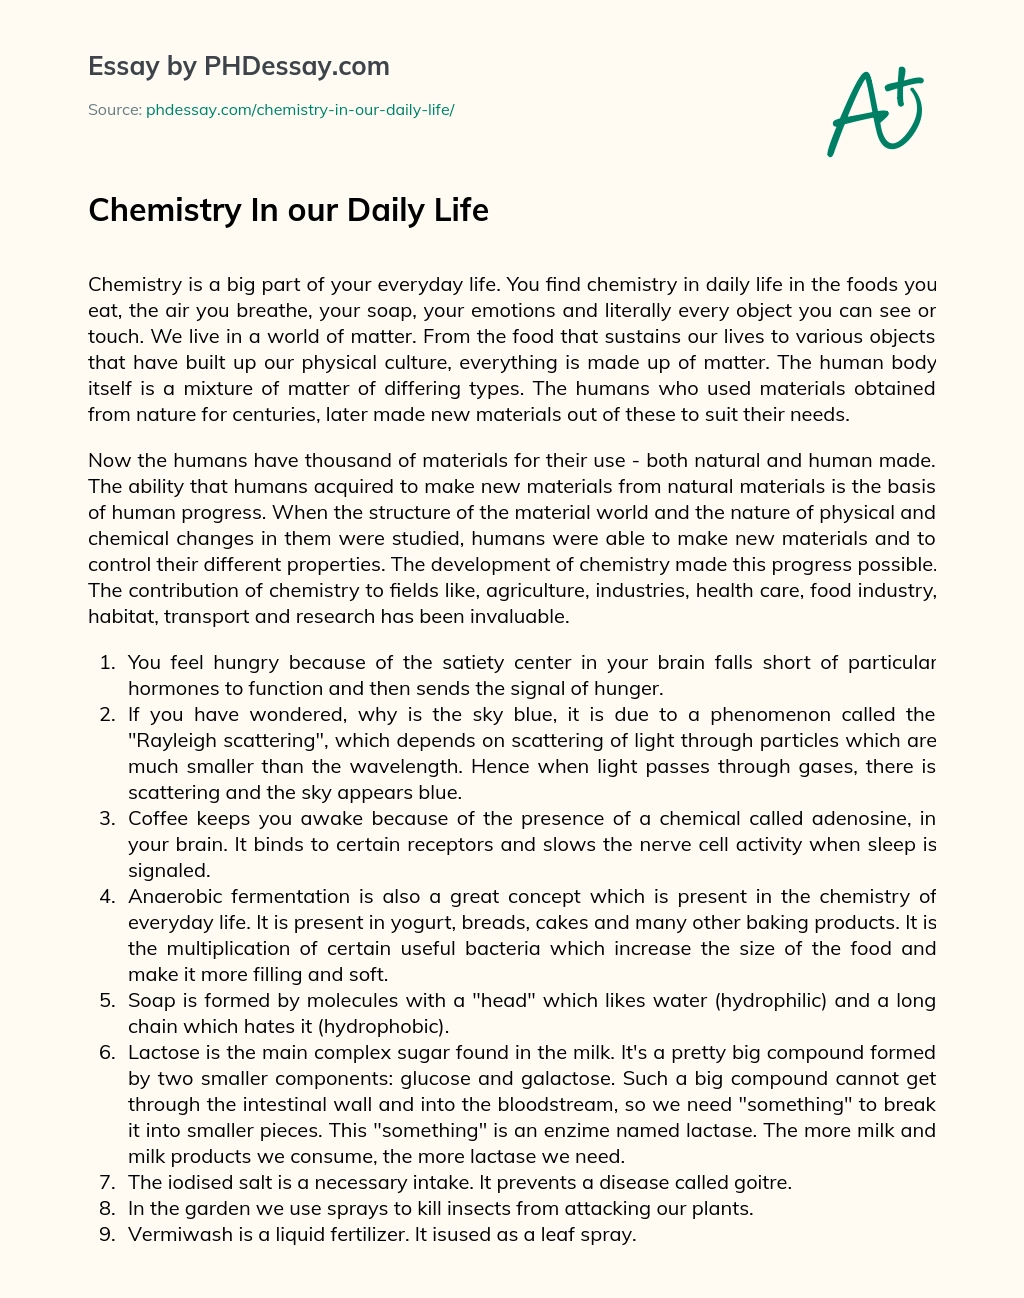 Chemistry In our Daily Life essay